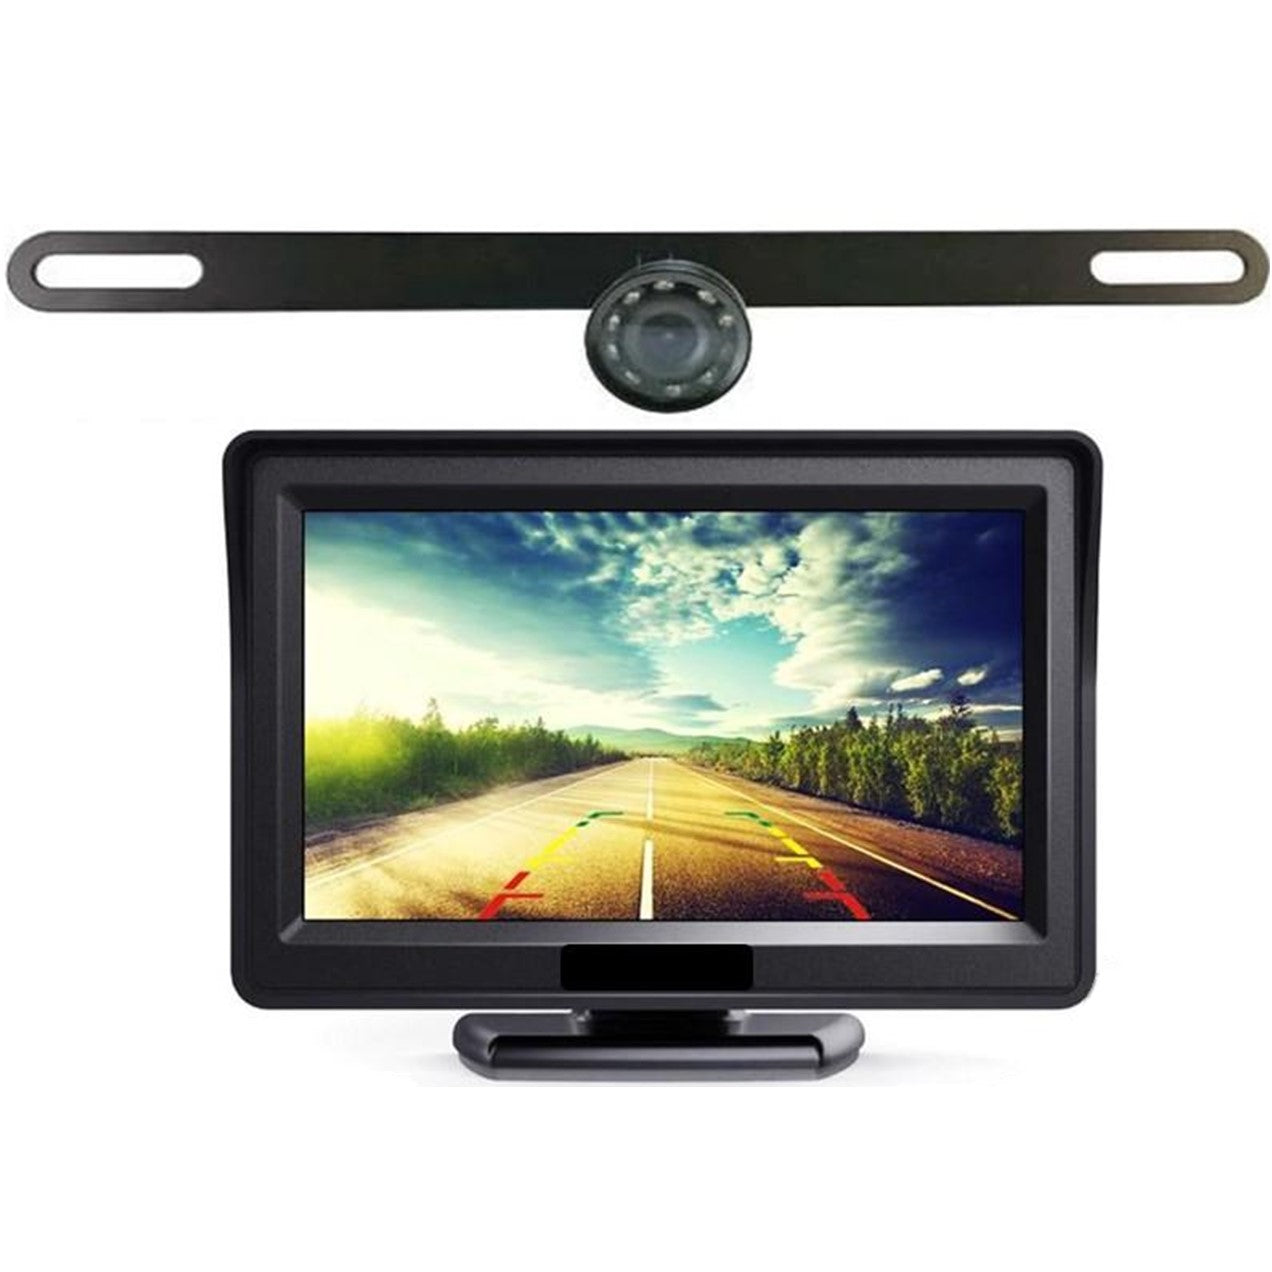 Wired License Plate Backup Cam 1080P HD 120 Degree Wide Angle Camera